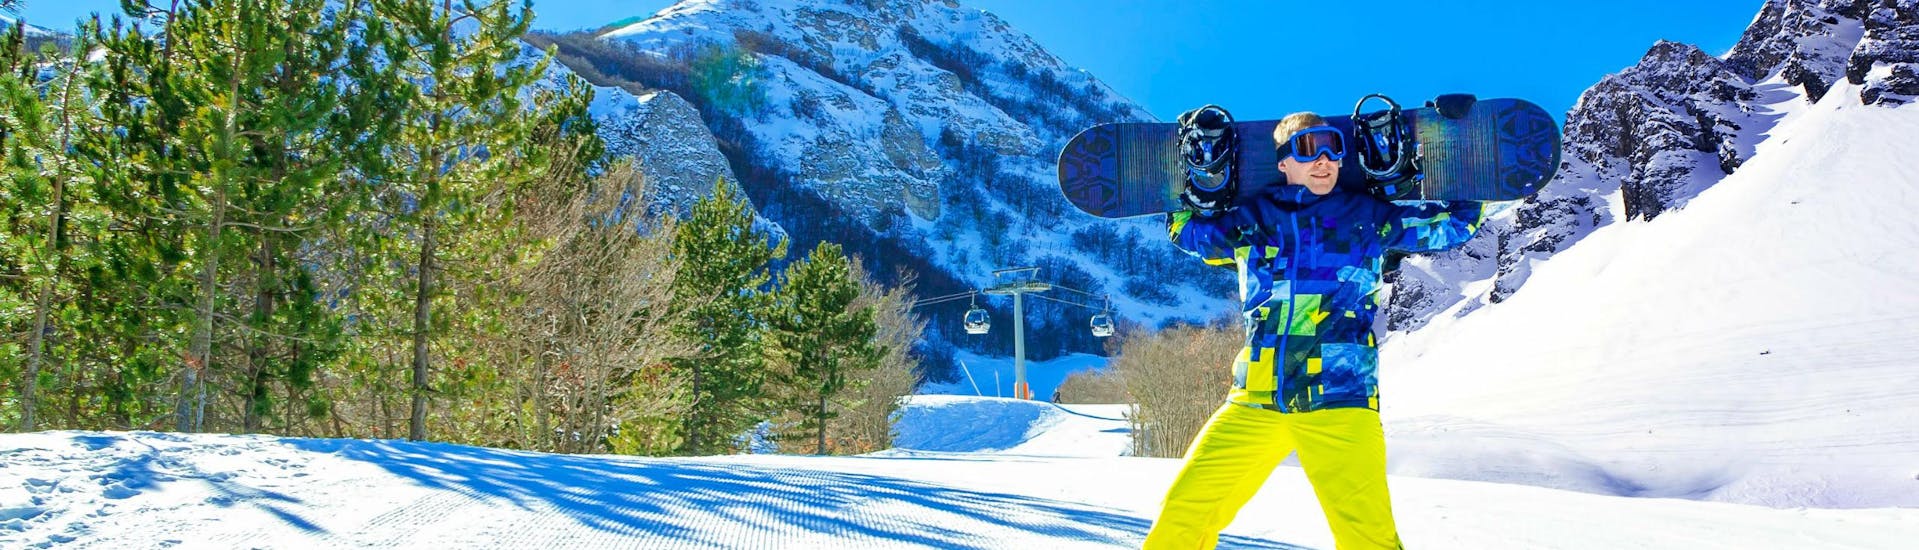 A snowboarder is posing for the camera on a sunny ski slope in the Italian ski resort of Campo Felice, where visitors can choose from a wide range of ski lessons offered by the local ski schools.